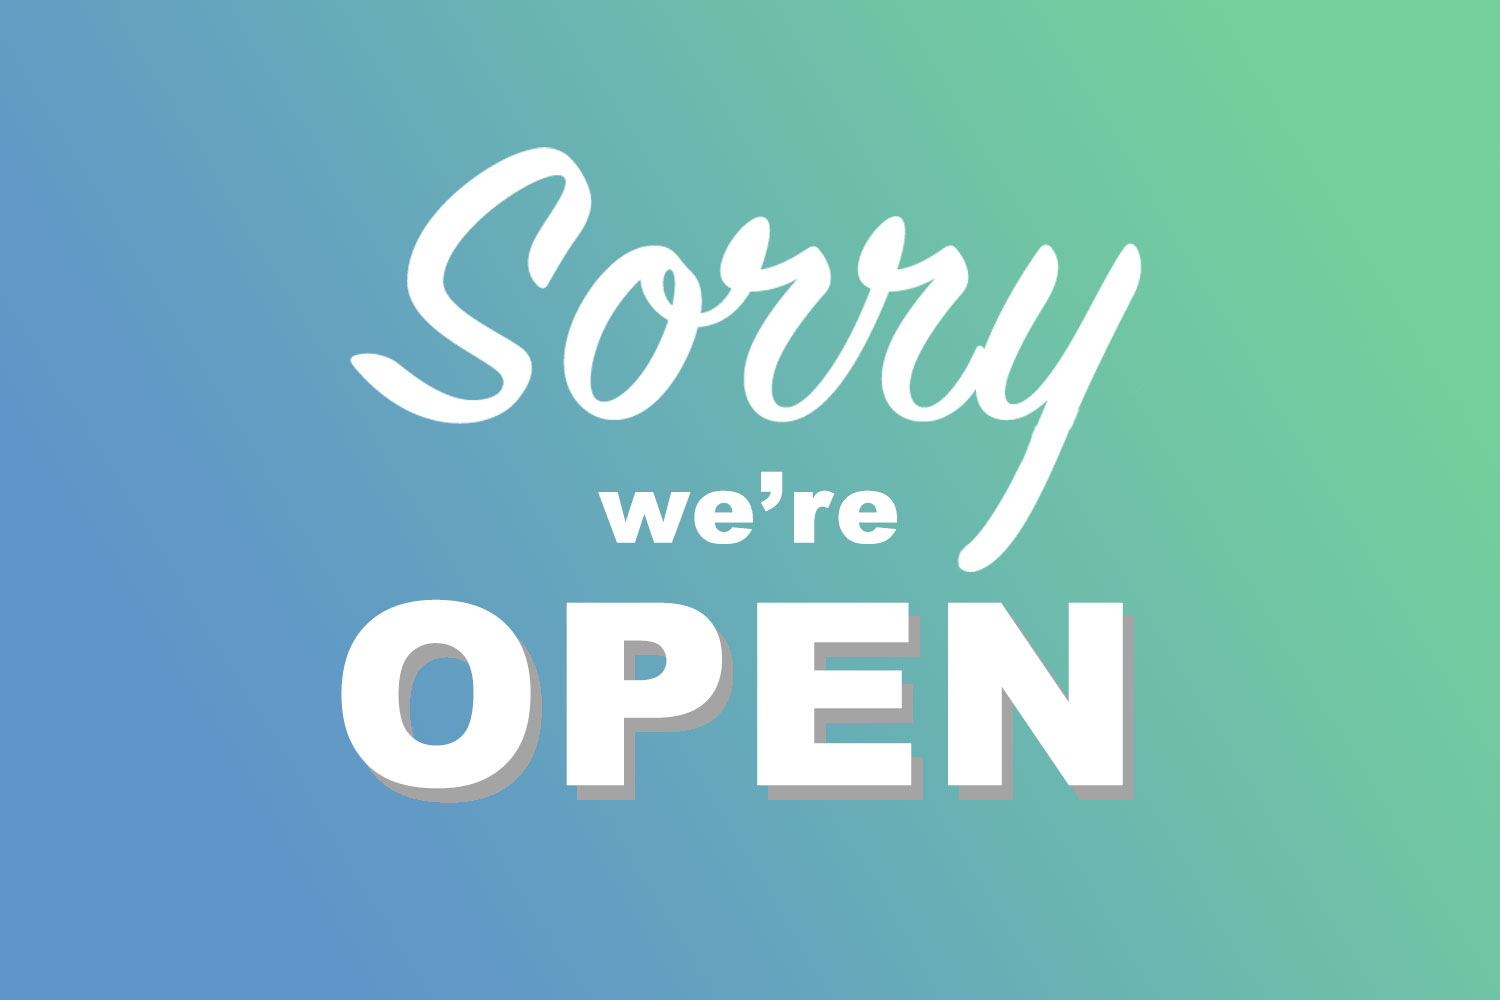 GRAPHIC: "Sorry, we're open" reads the text over a blue and green gradient. Despite a surge in COVID-19 cases in Houston, UHCL remains open. Graphic by The Signal Executive Editor Miles Shellshear.